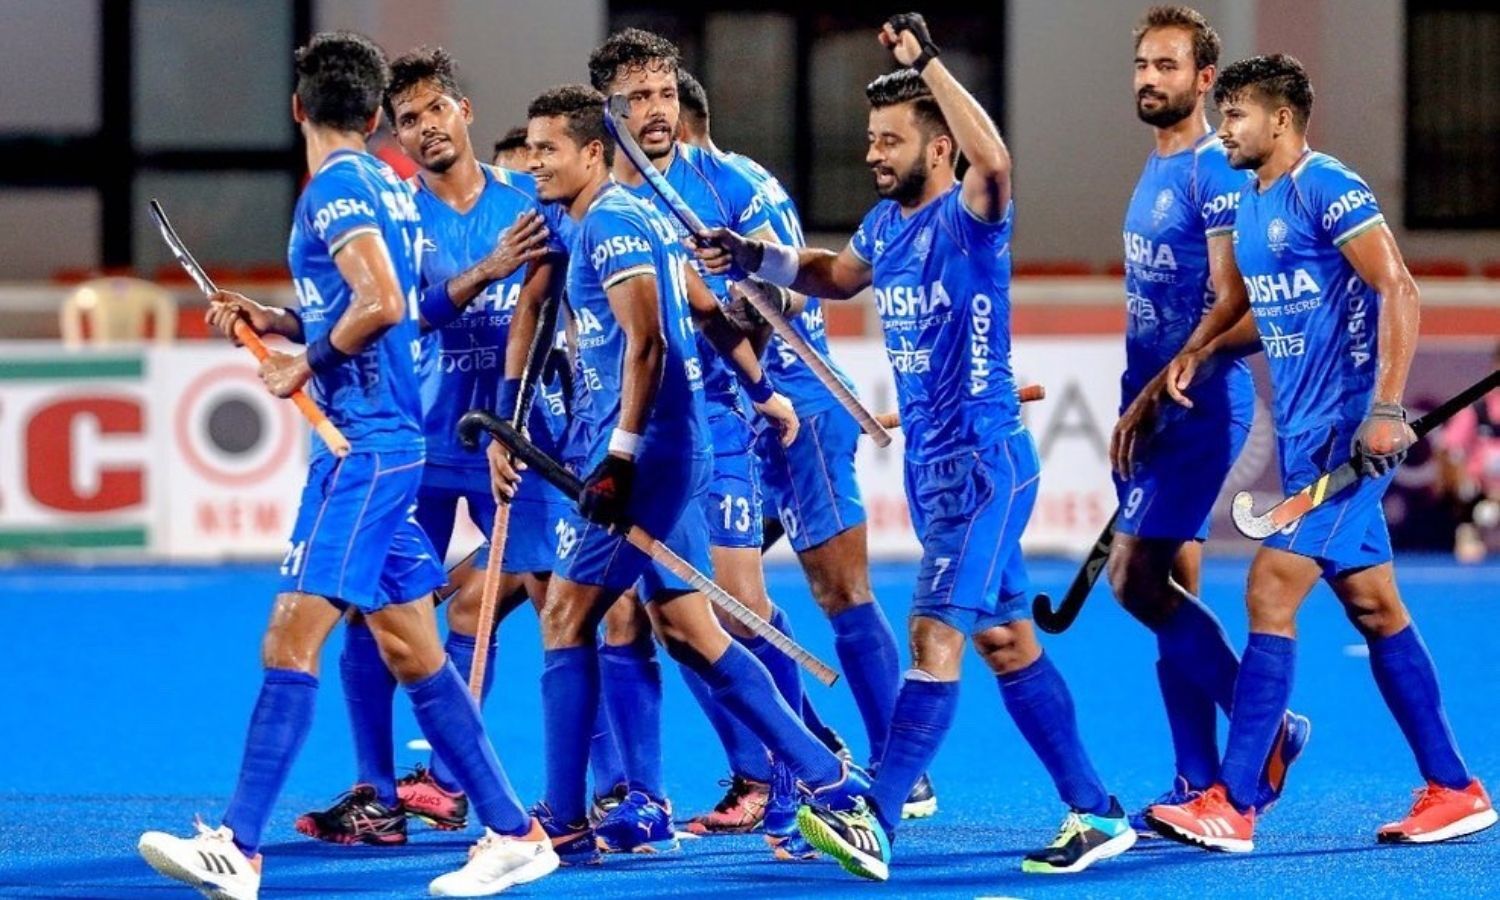 With 100 days to Paris Olympics, Indian men's hockey team targets gold